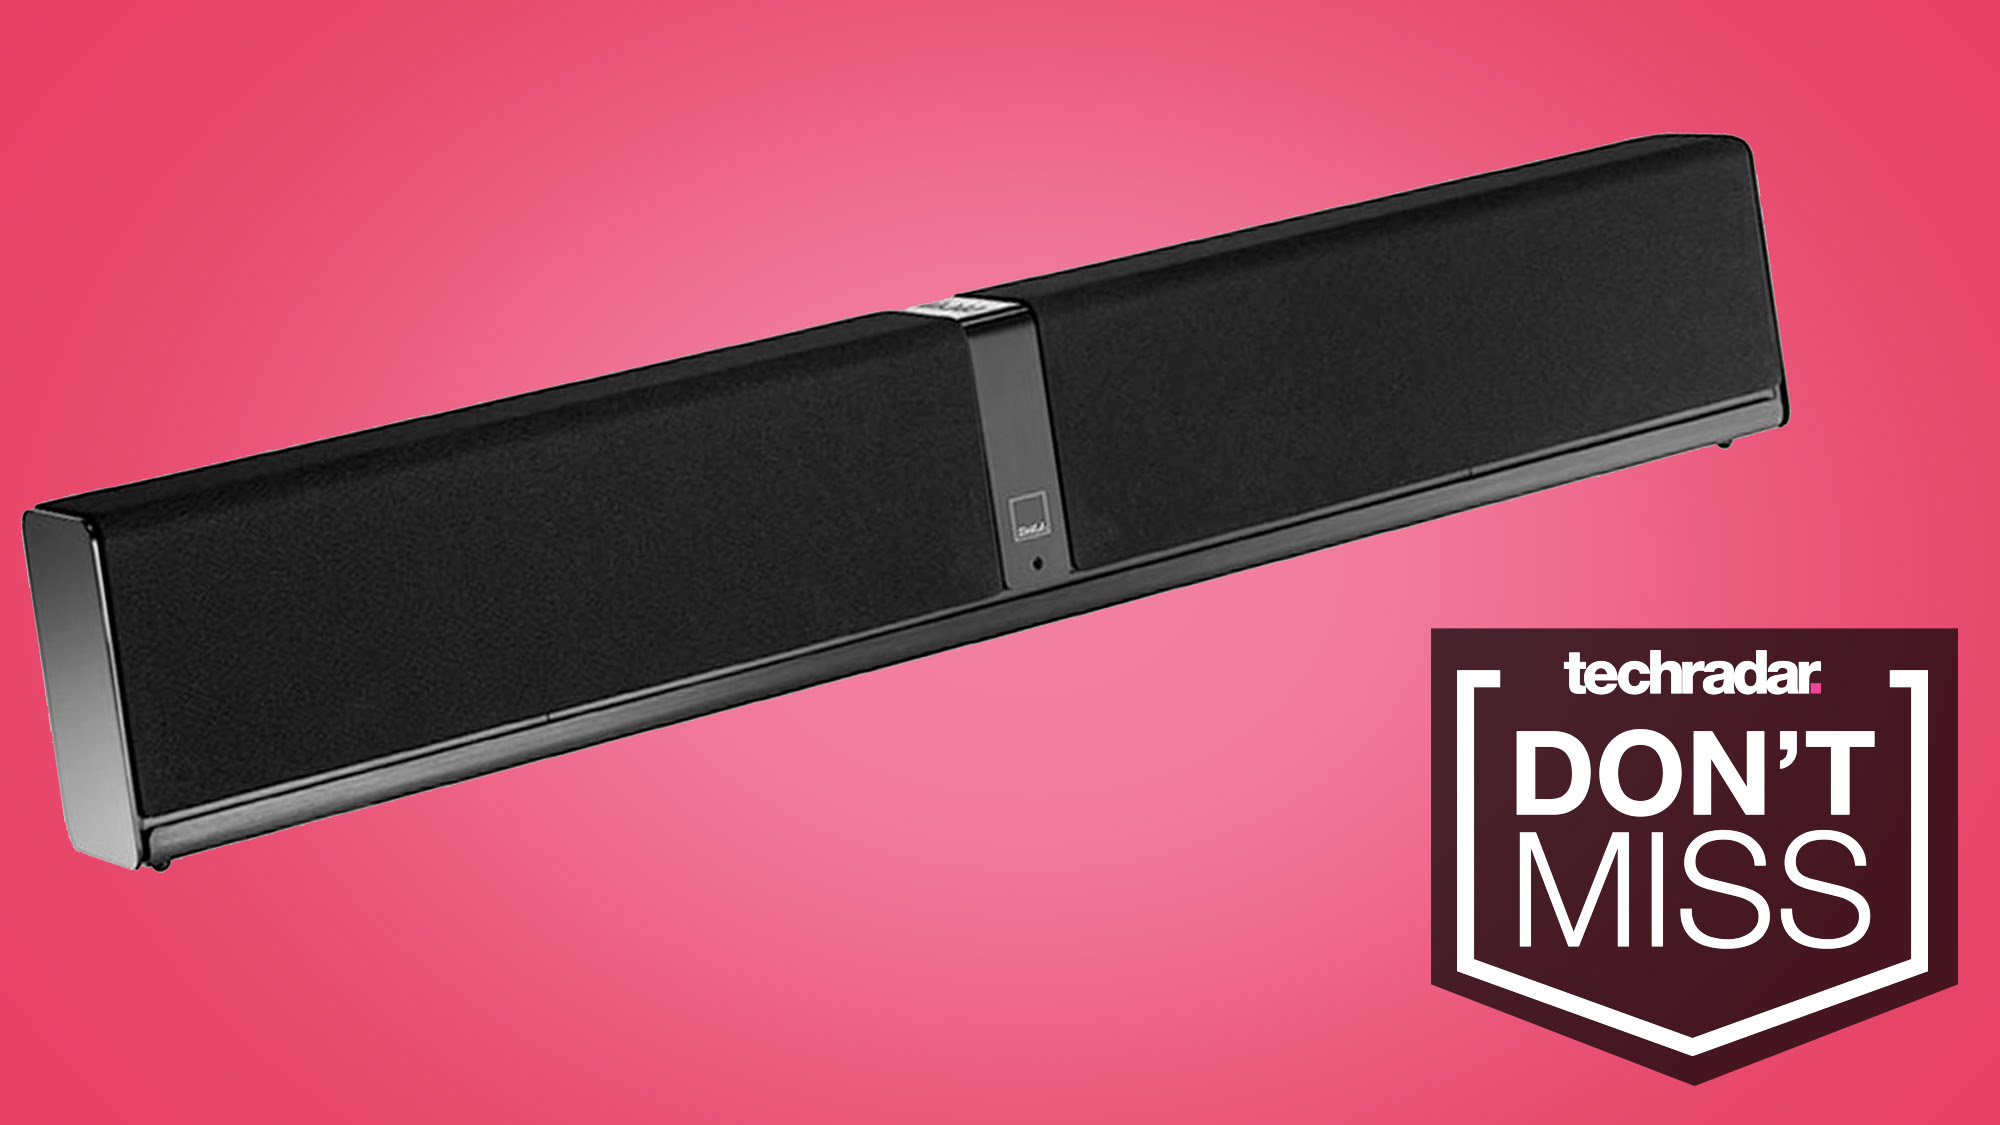 One of the all-time best soundbars is £100 off with this Black Friday deal